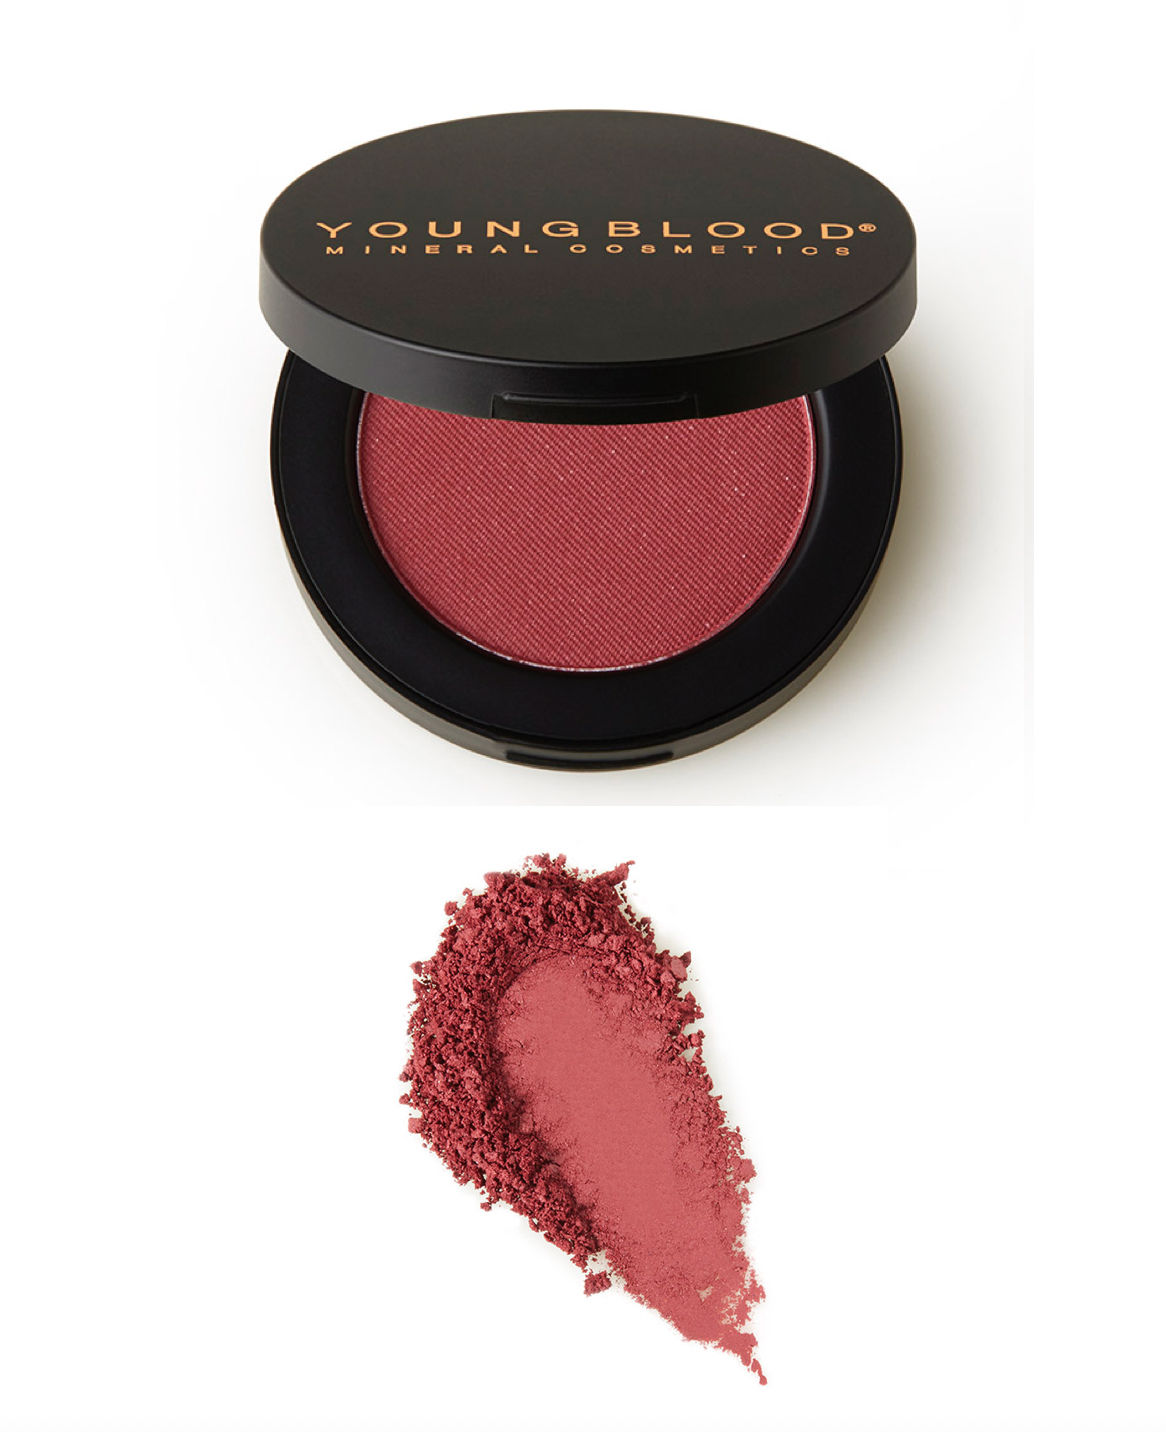 Youngblood Cosmetics Pressed Mineral Blush